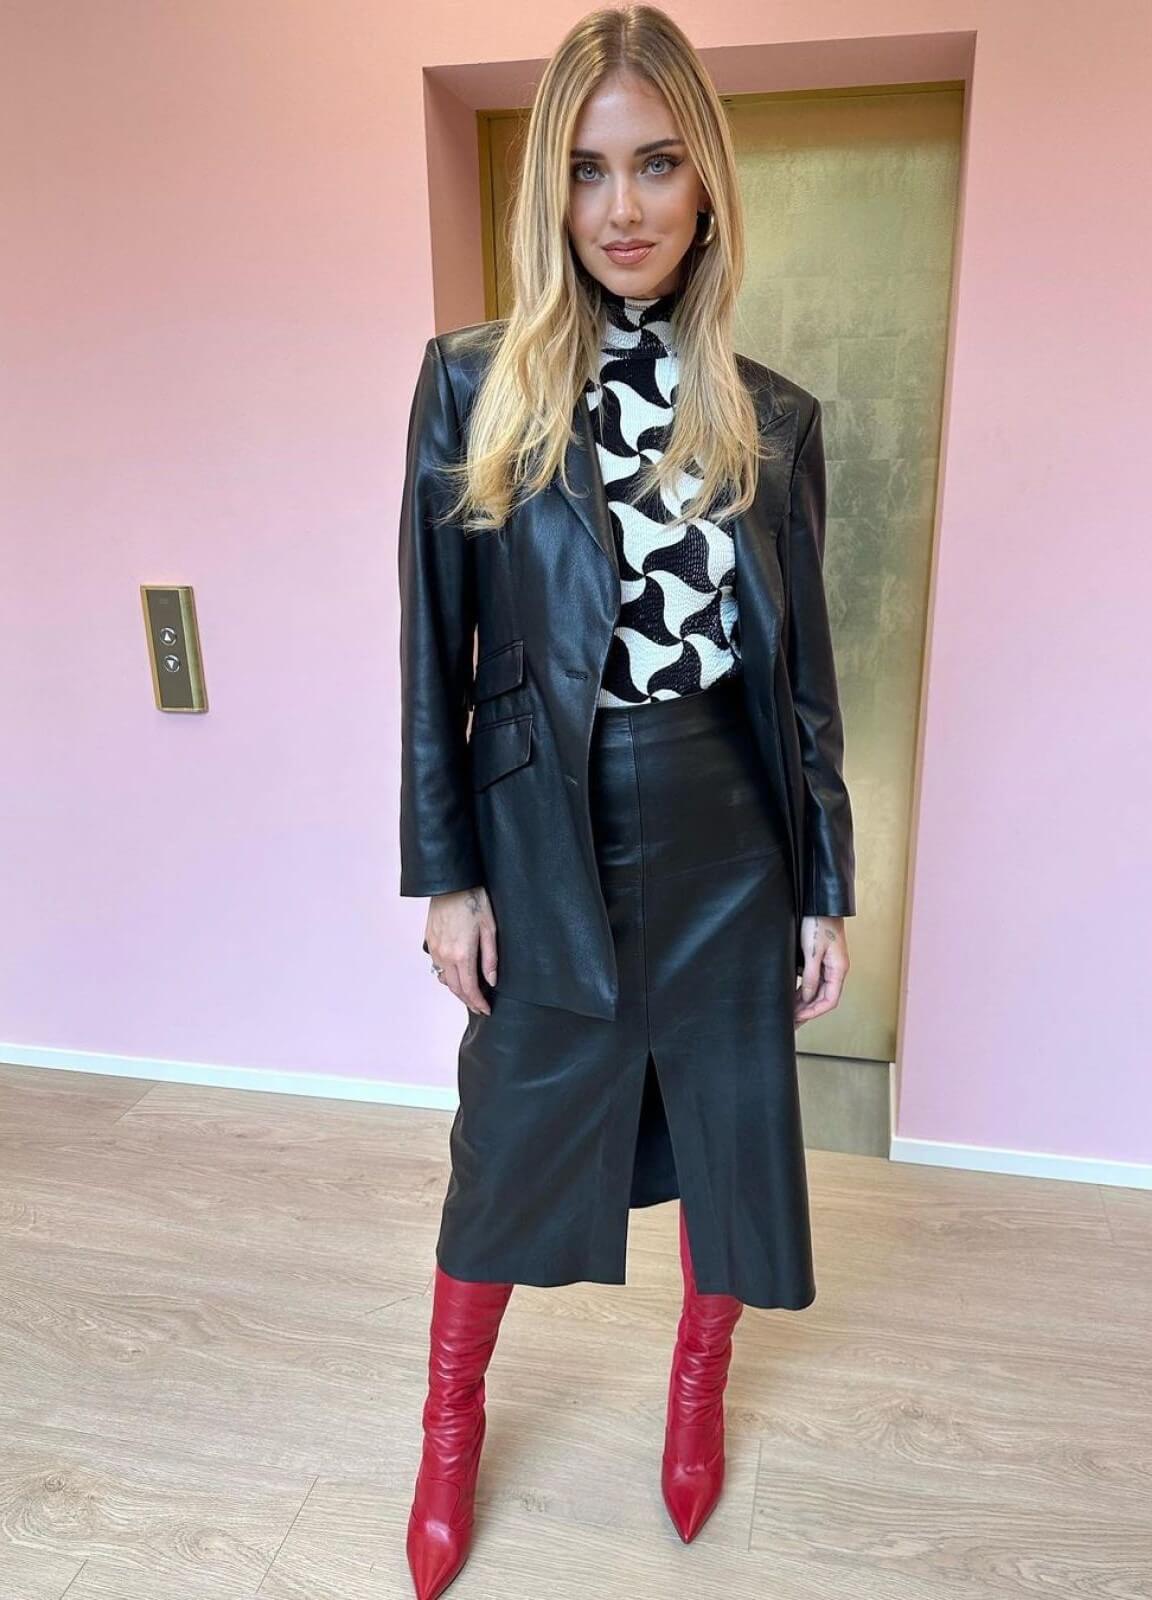 Chiara Ferragni In Black Leather Long Jacket Under High Neck Top With Long Slit Cut Skirt Outfits